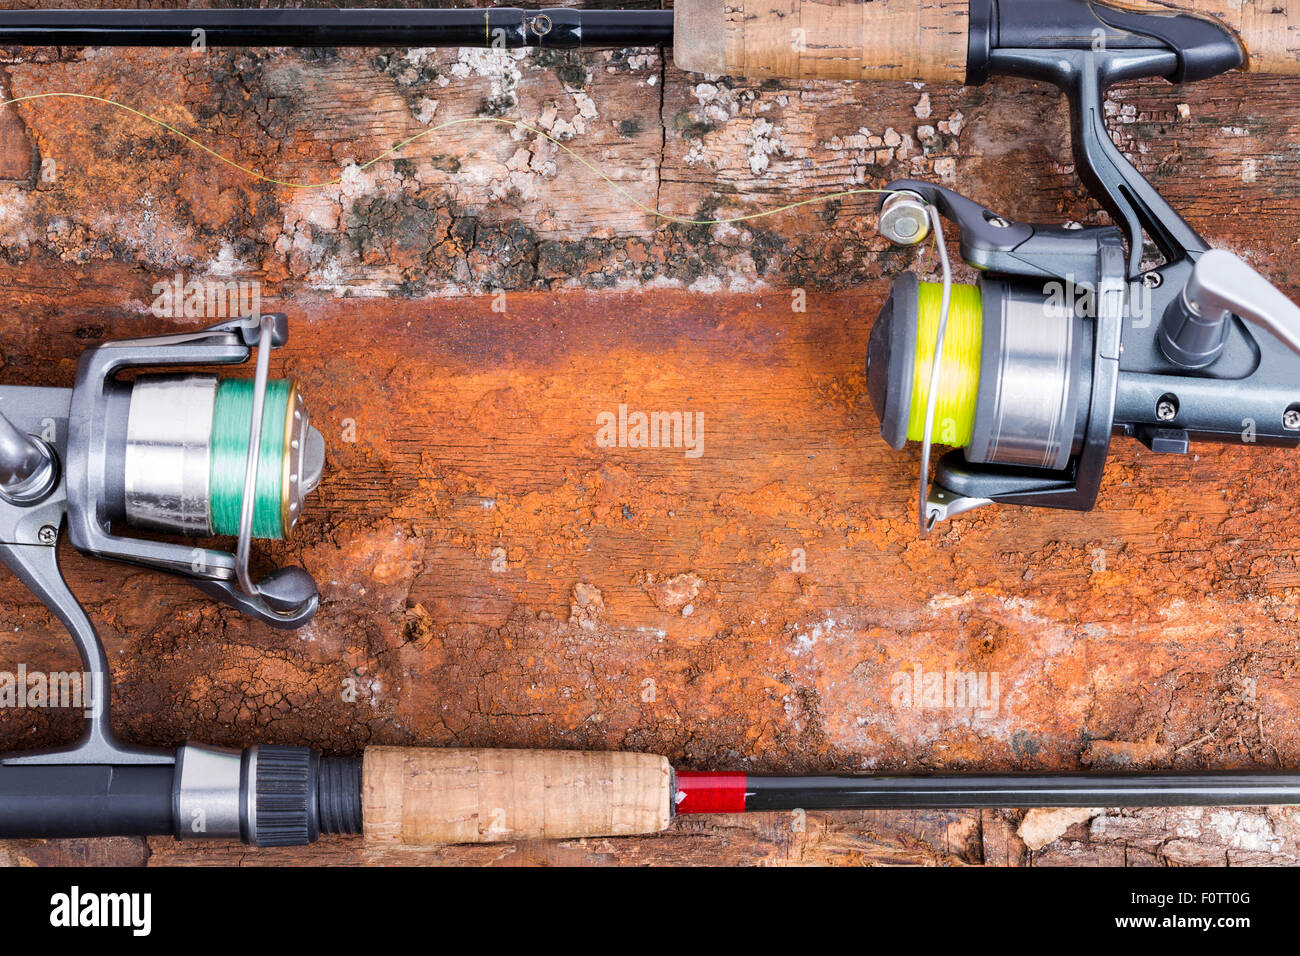 https://c8.alamy.com/comp/F0TT0G/fishing-rod-and-reel-with-line-on-natural-background-for-frame-print-F0TT0G.jpg